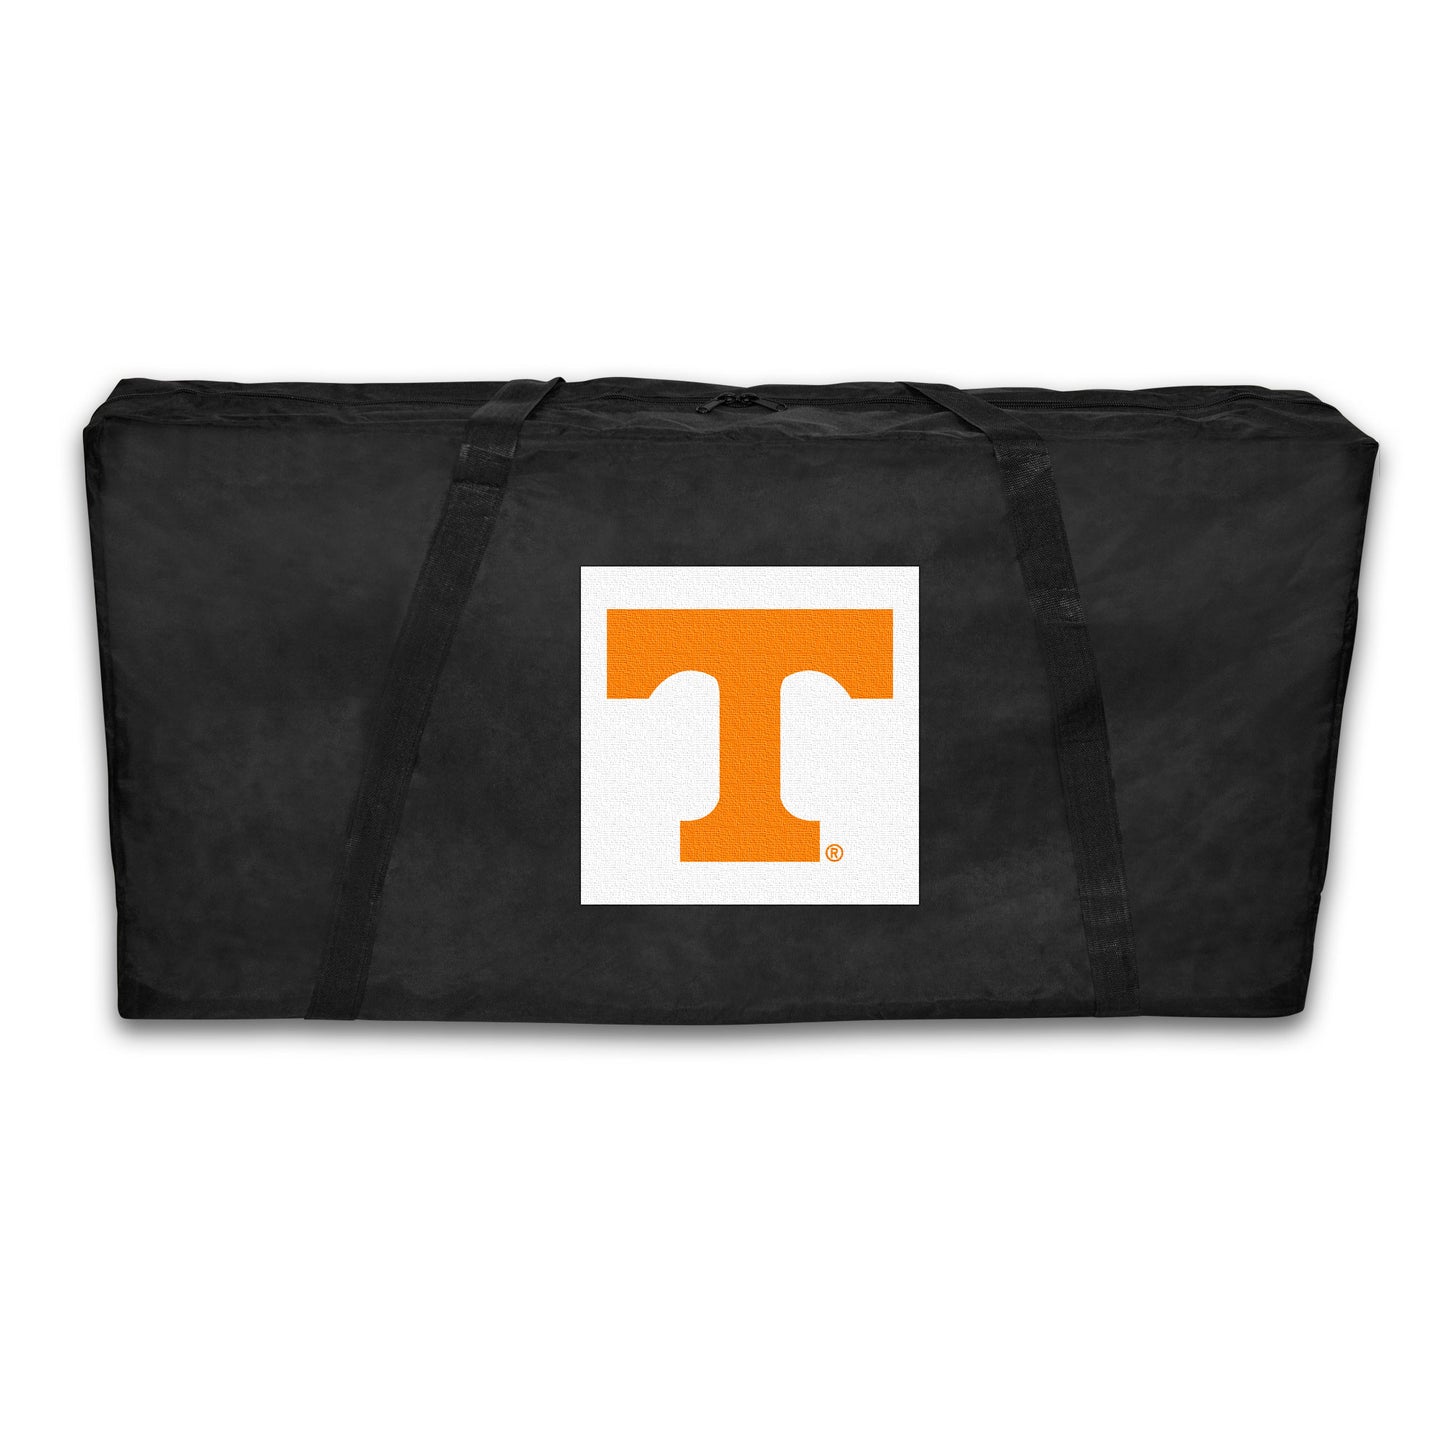 University of Tennessee Cornhole Carrying Case